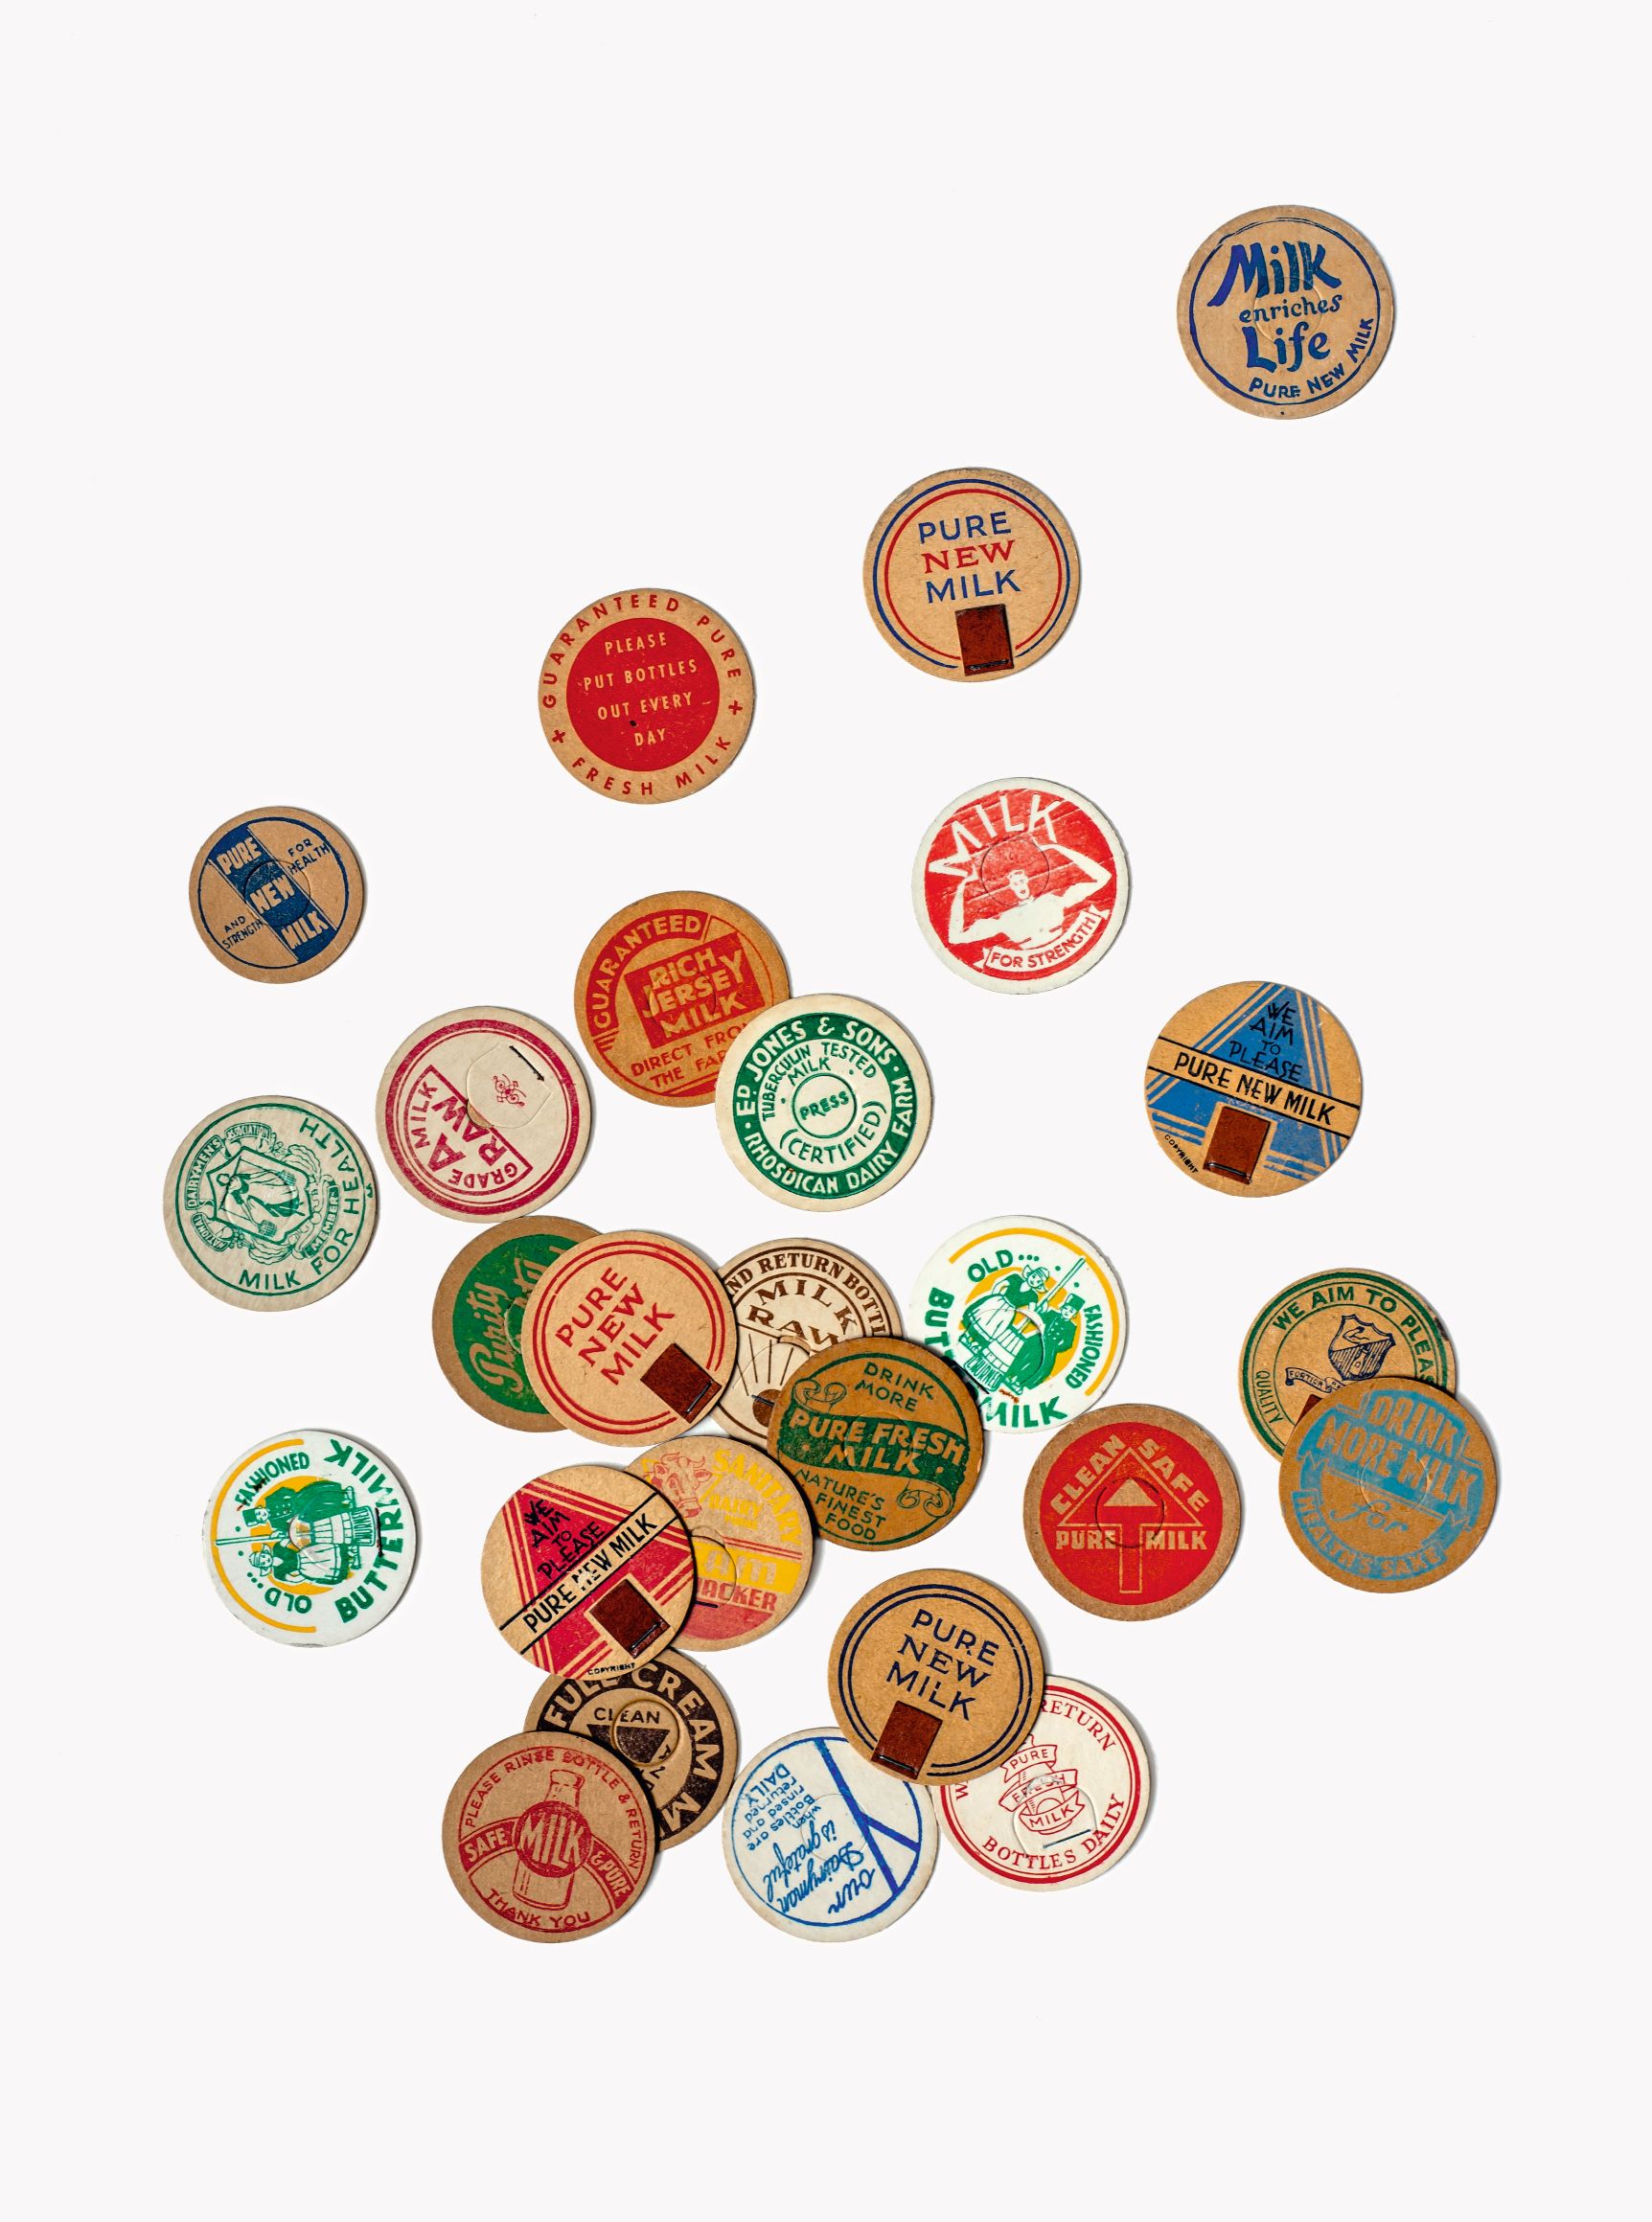 Milk-bottle Tops (England, 1950s), 1½ in. (3.8 cm) diameter, photograph by Flora Fricker, collection of Annie Atkins 